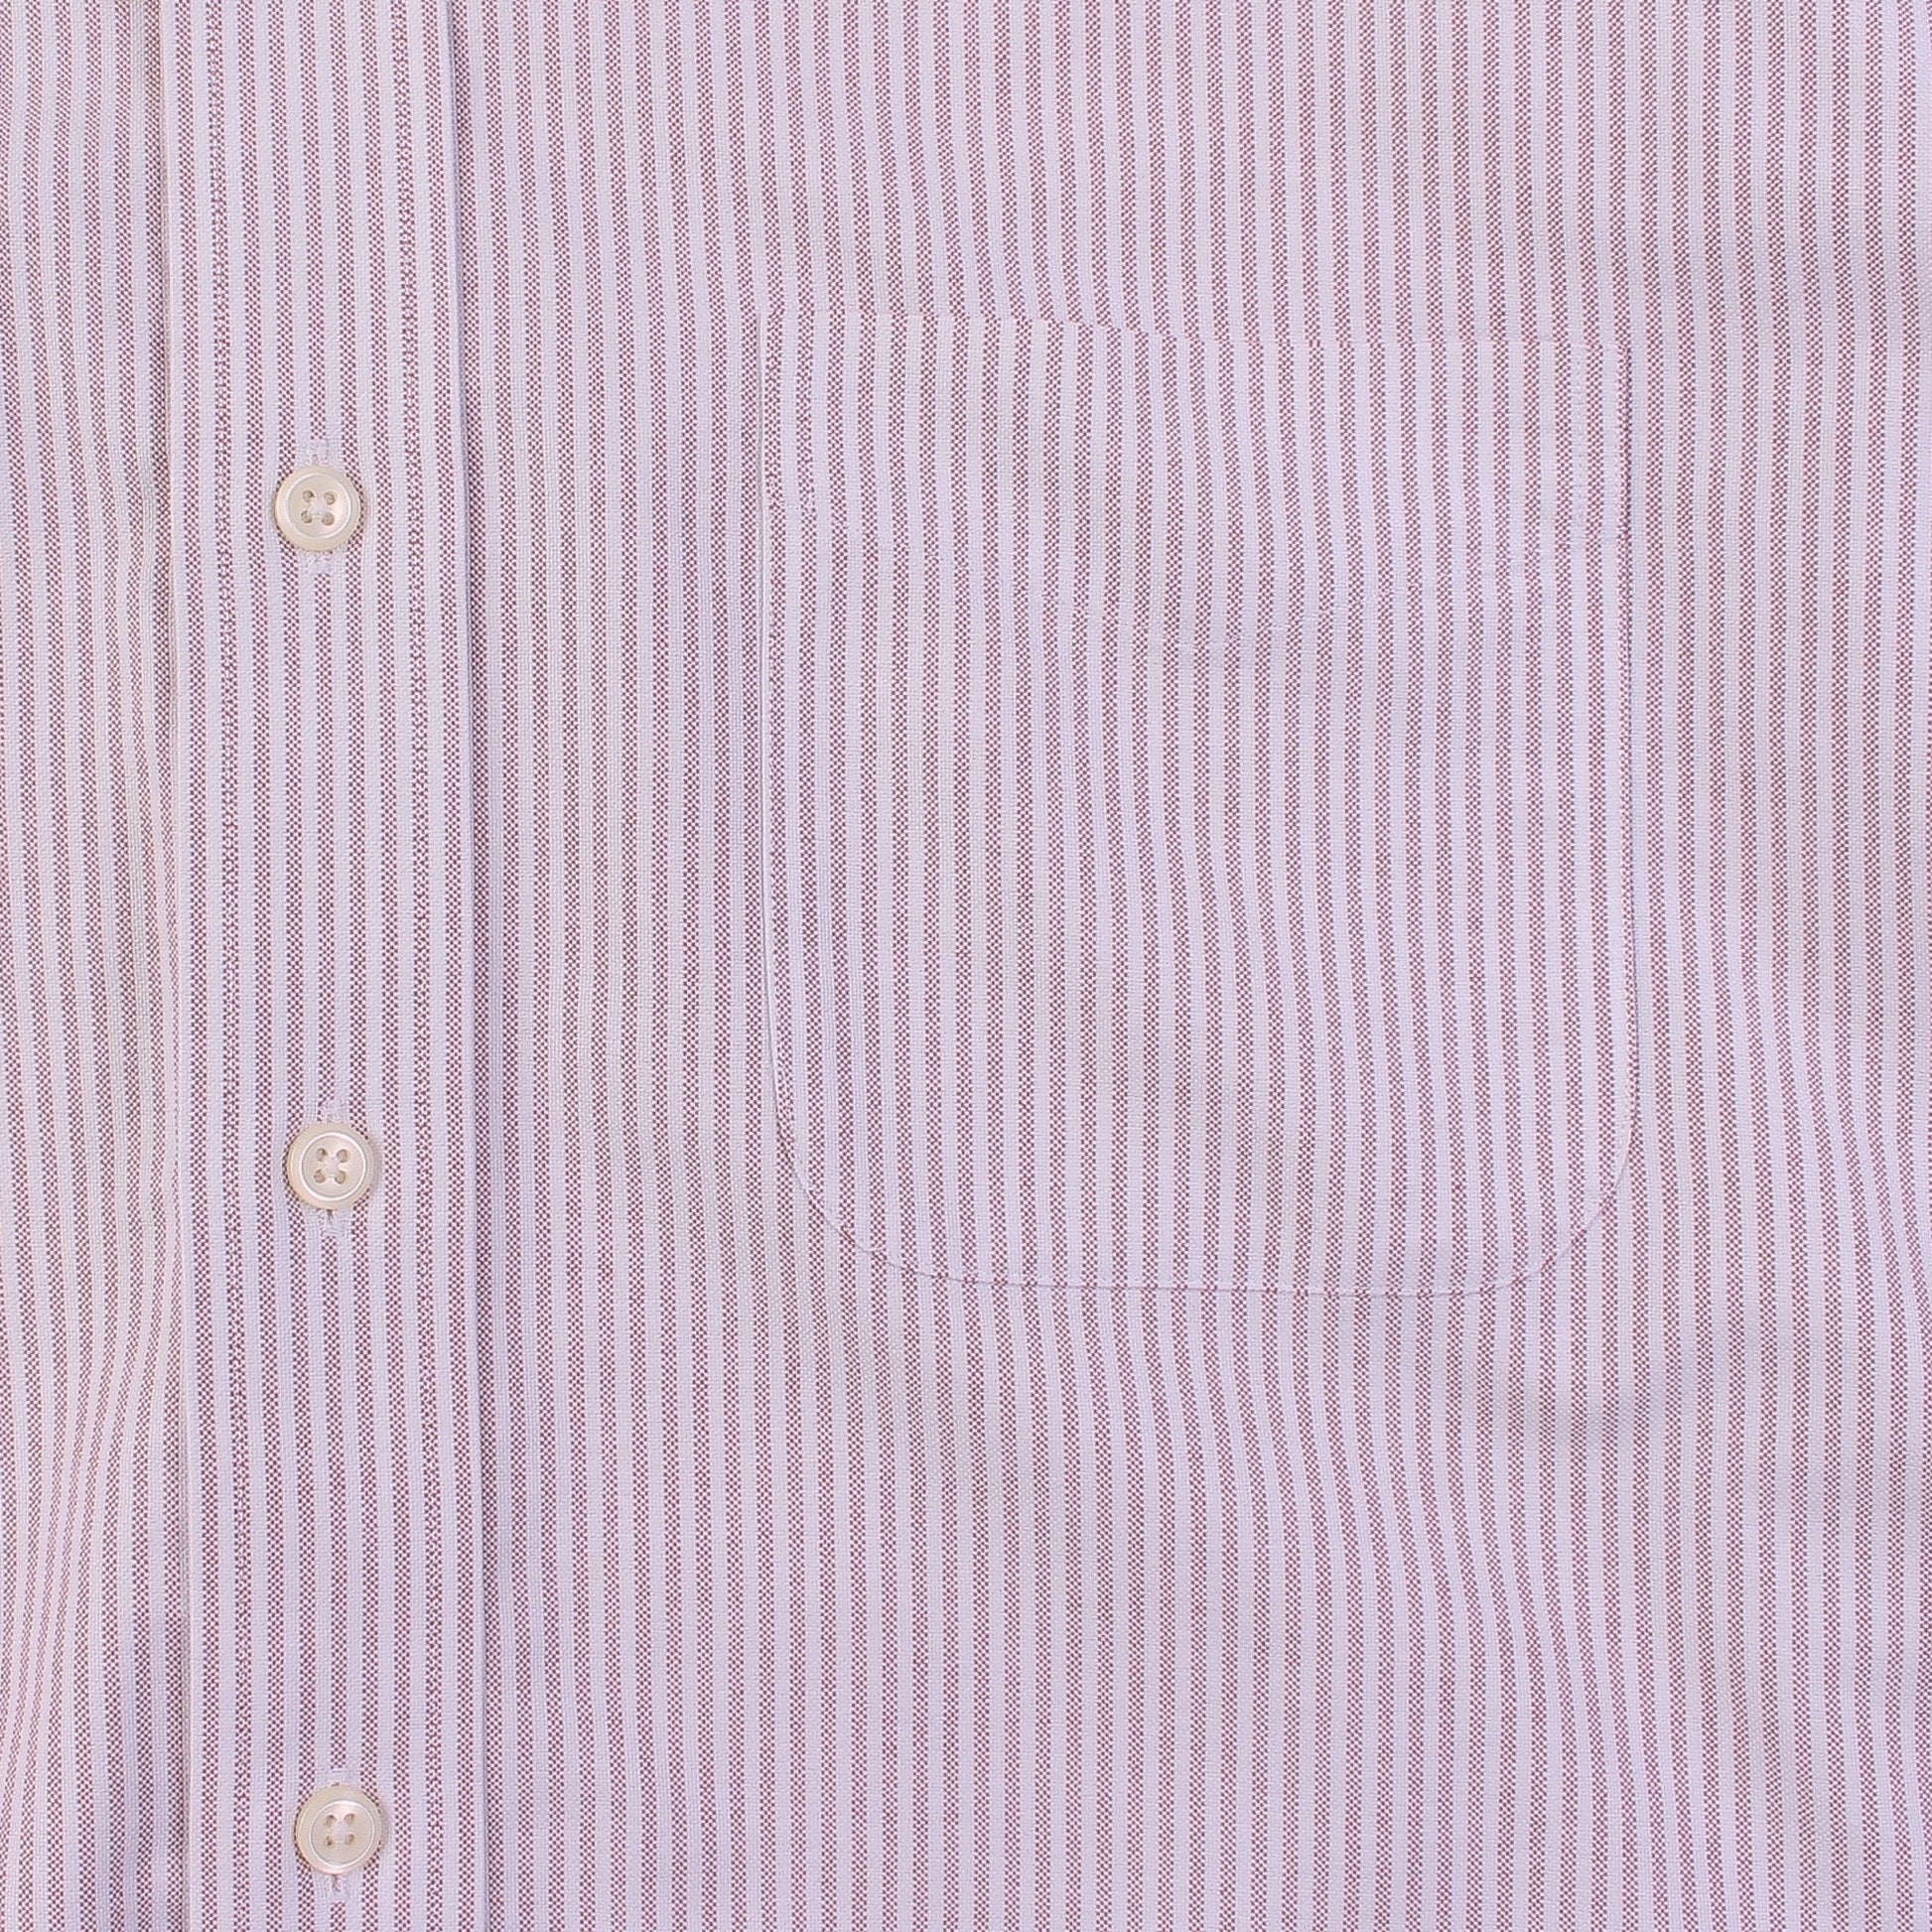 Vintage Shirt - Pink and White Stripe - American Madness